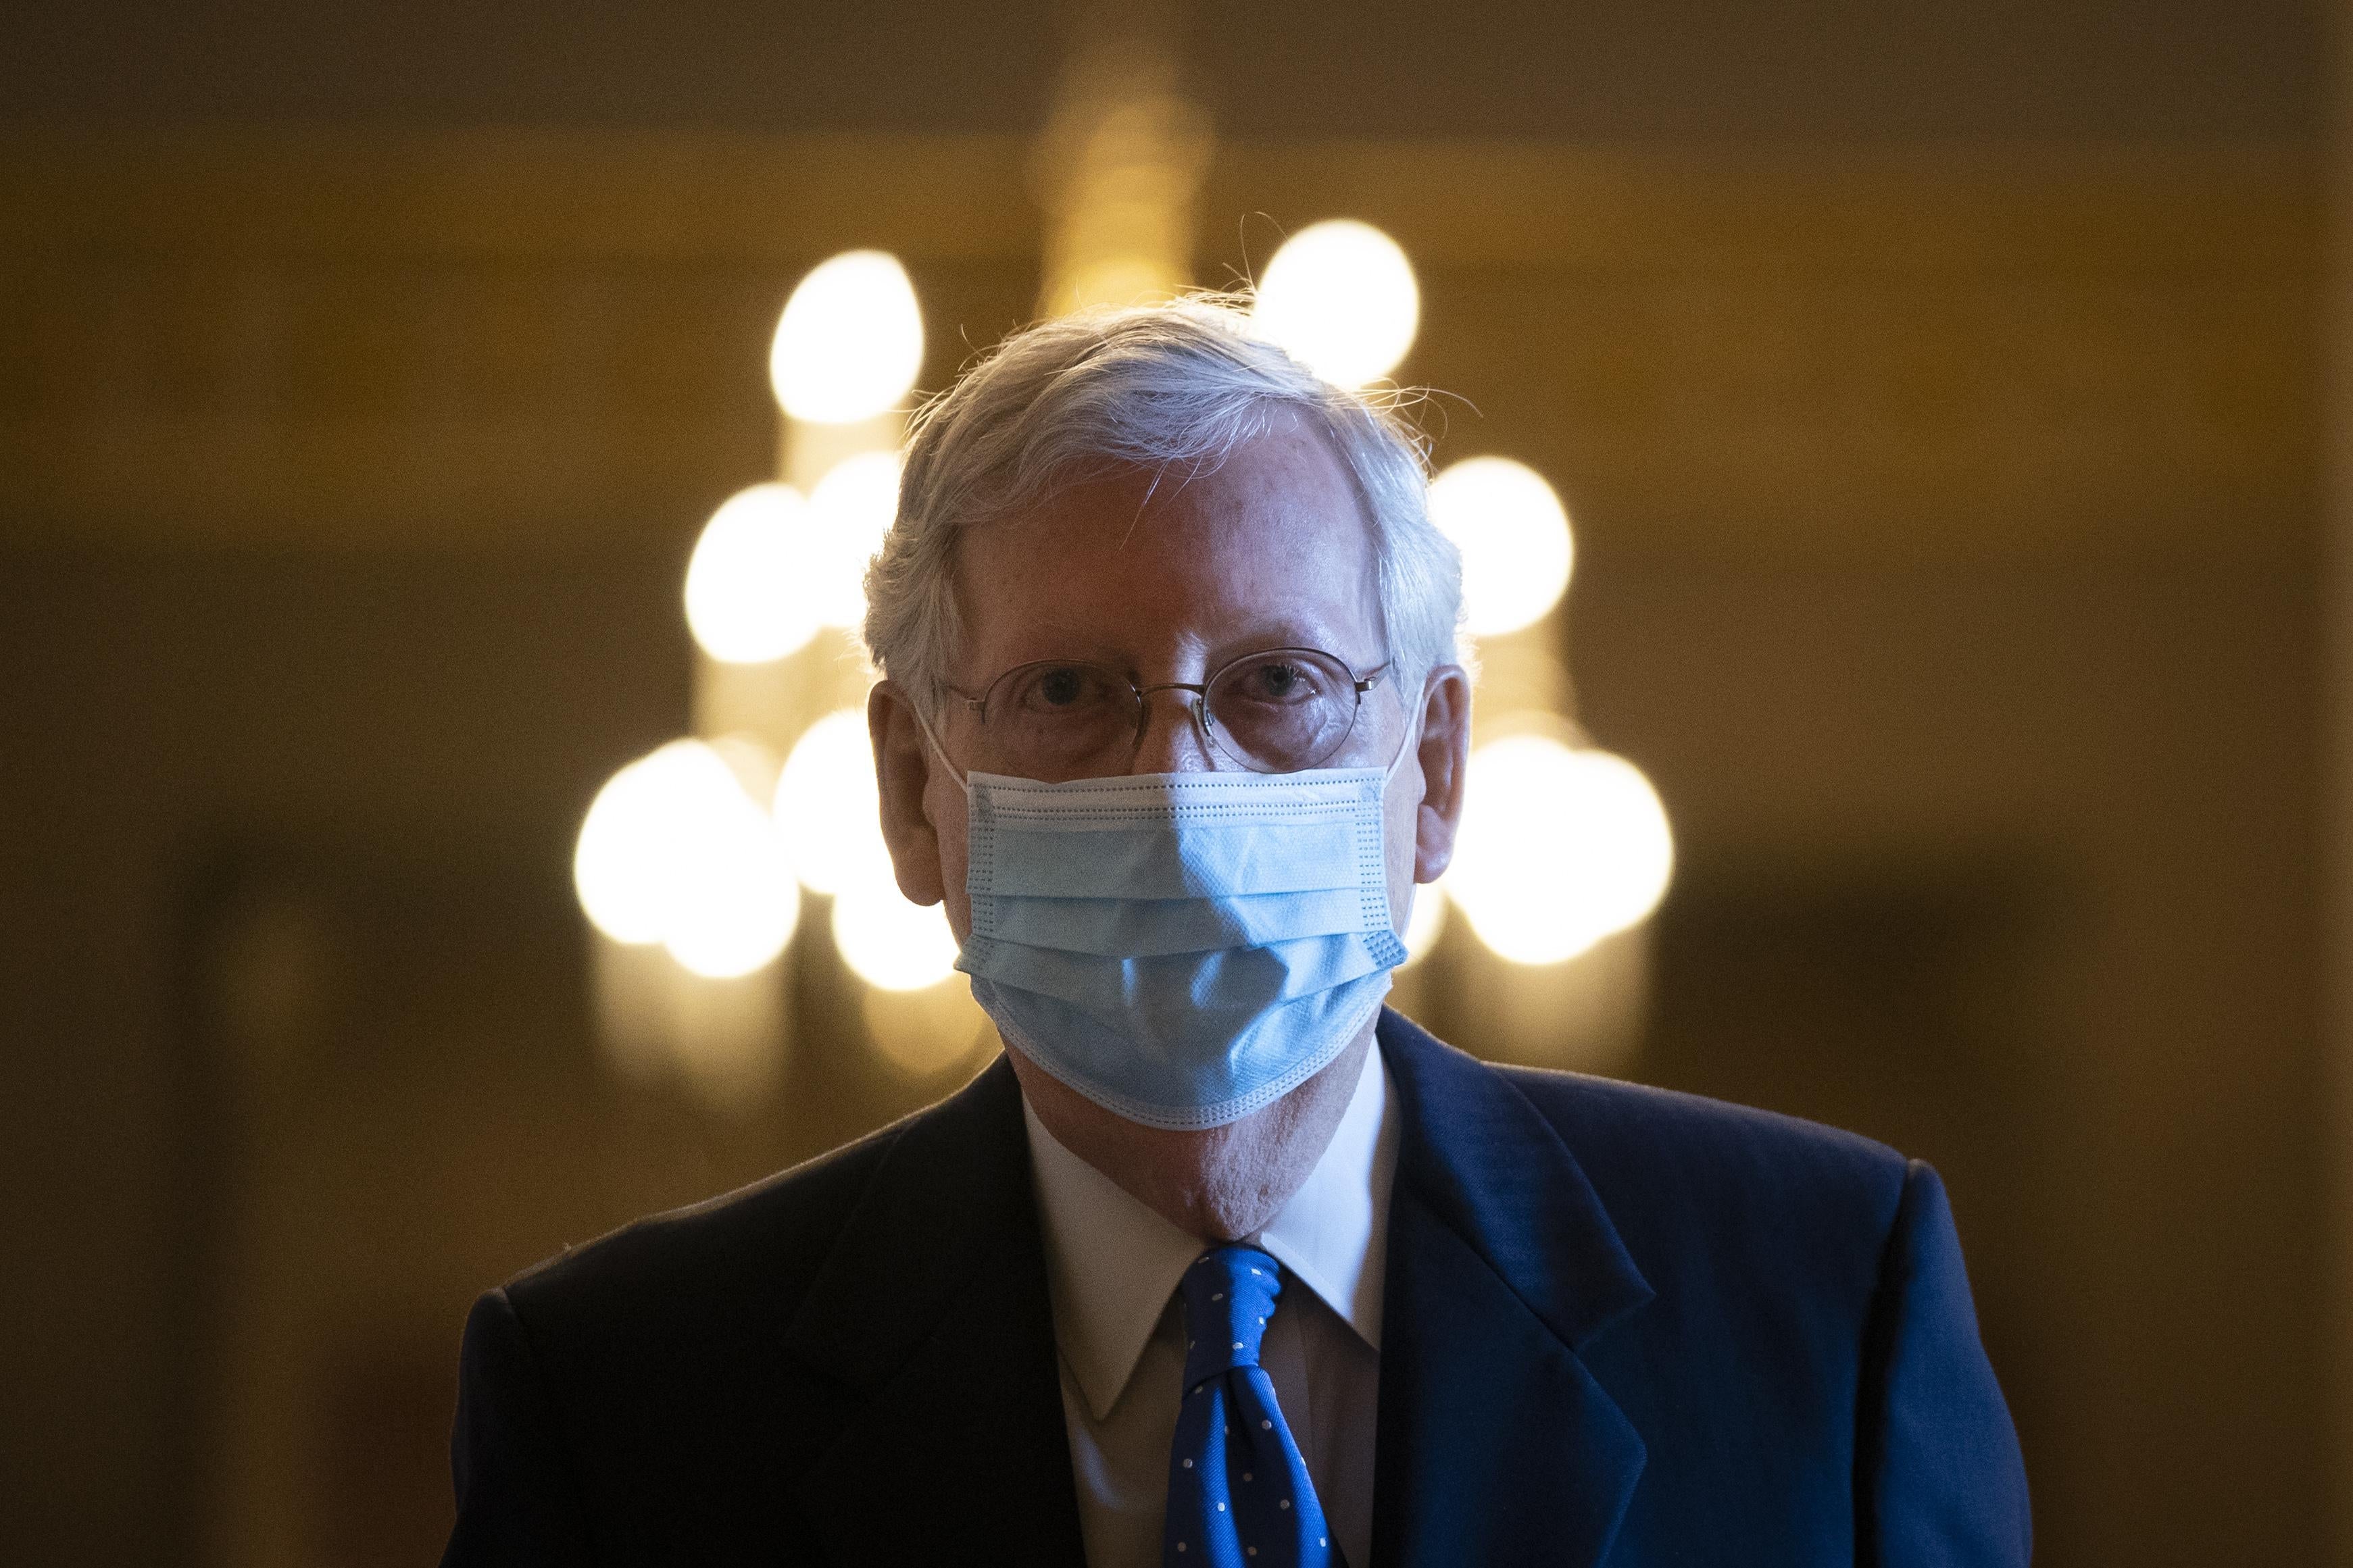 Mitch McConnell walking, wearing a mask, with a chandelier behind his head